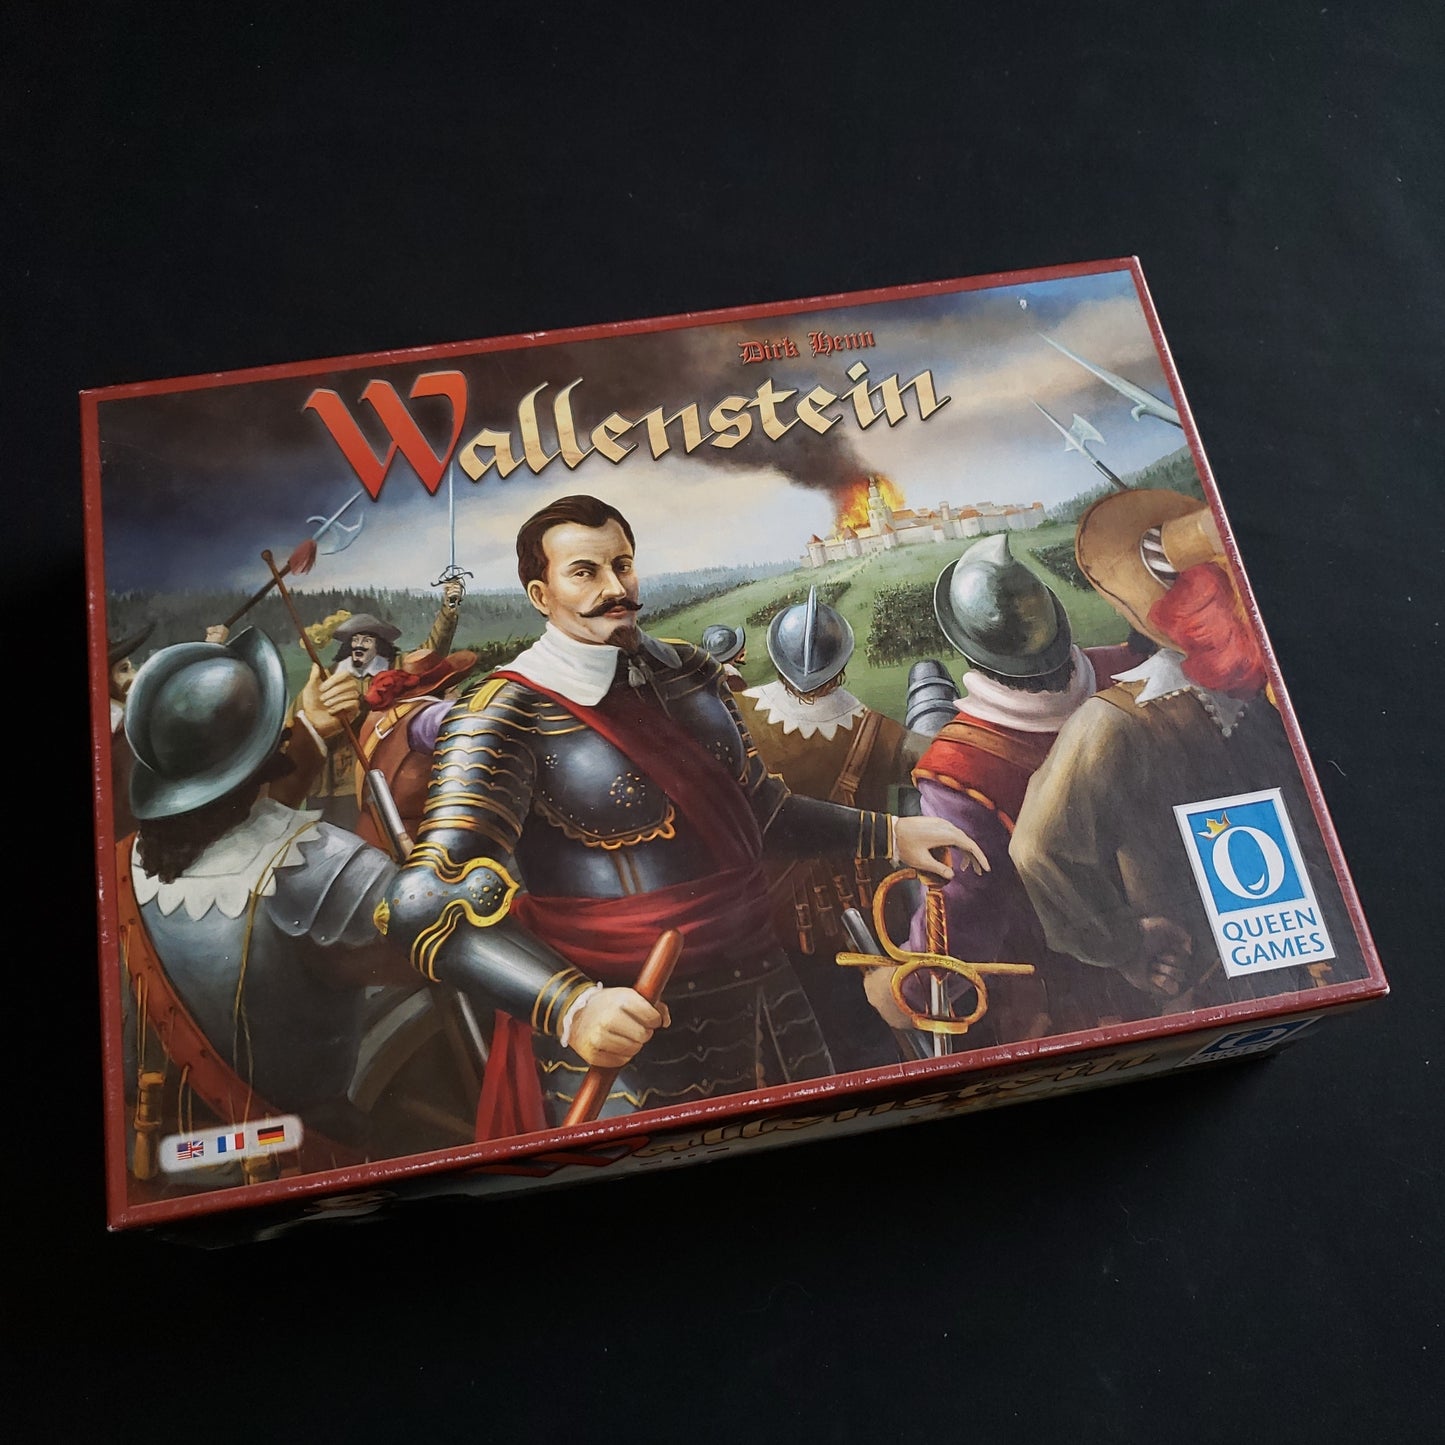 Image shows the front cover of the box of the Wallenstein: Second Edition board game